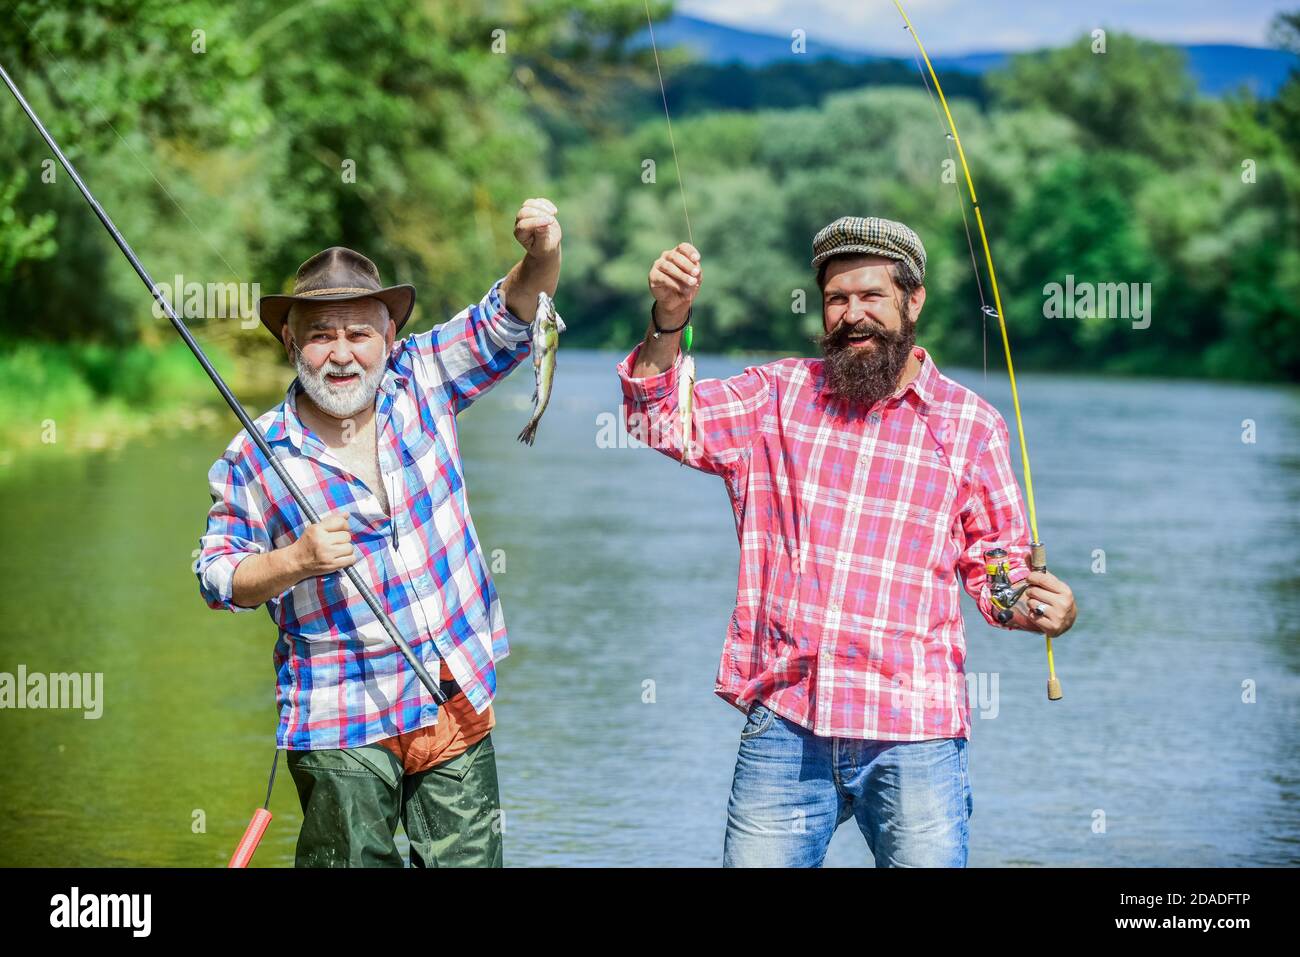 Mature man with friend fishing. Summer vacation. Happy cheerful people.  Fishing freshwater lake pond river. Bearded men catching fish. Family time.  Fisherman with fishing rod. Activity and hobby Stock Photo - Alamy